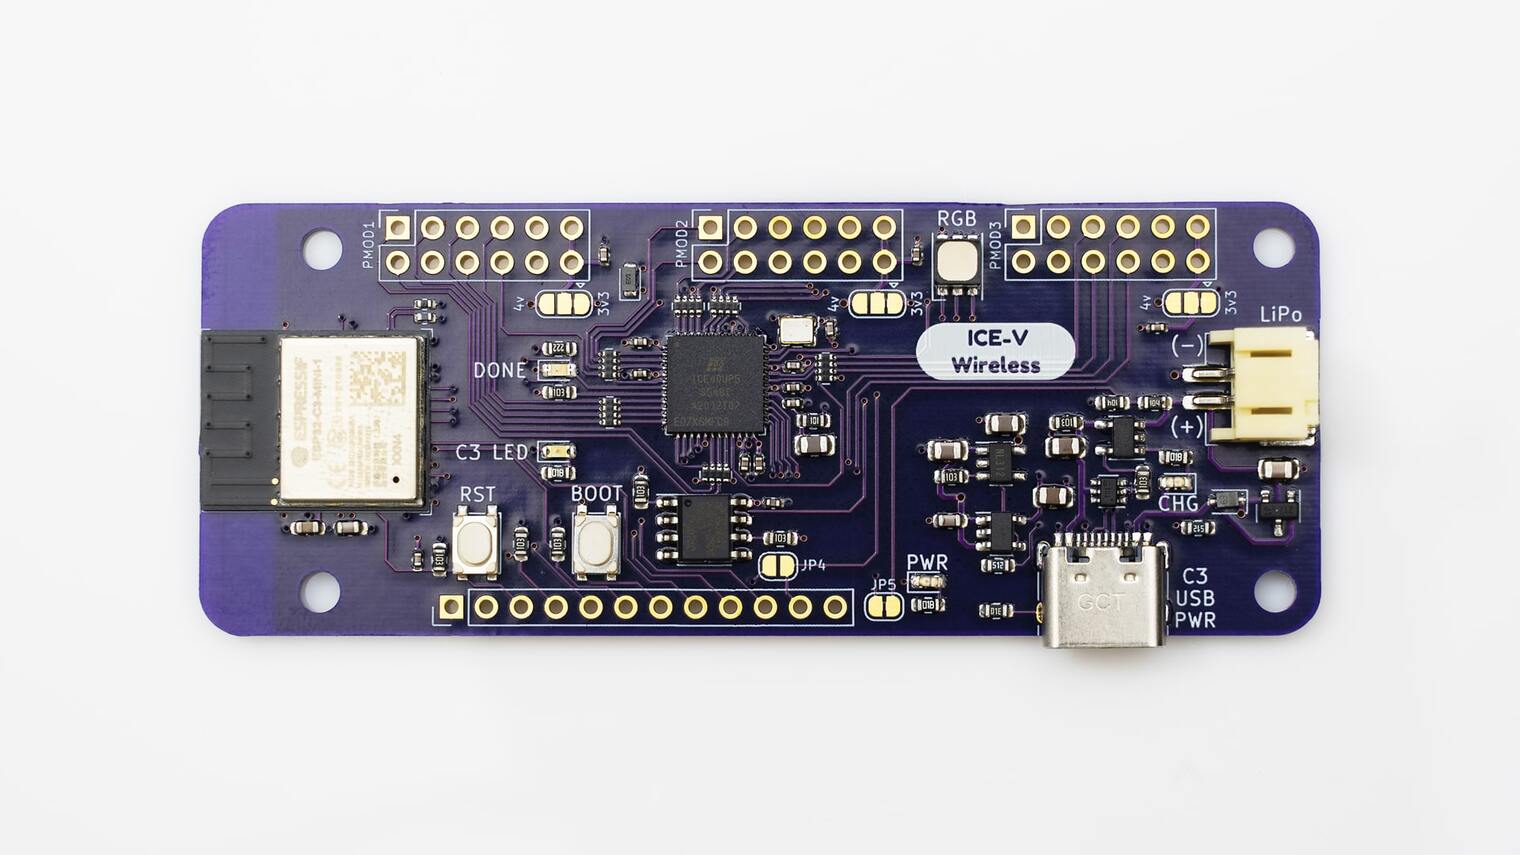 ICV-V Wireless board - front view